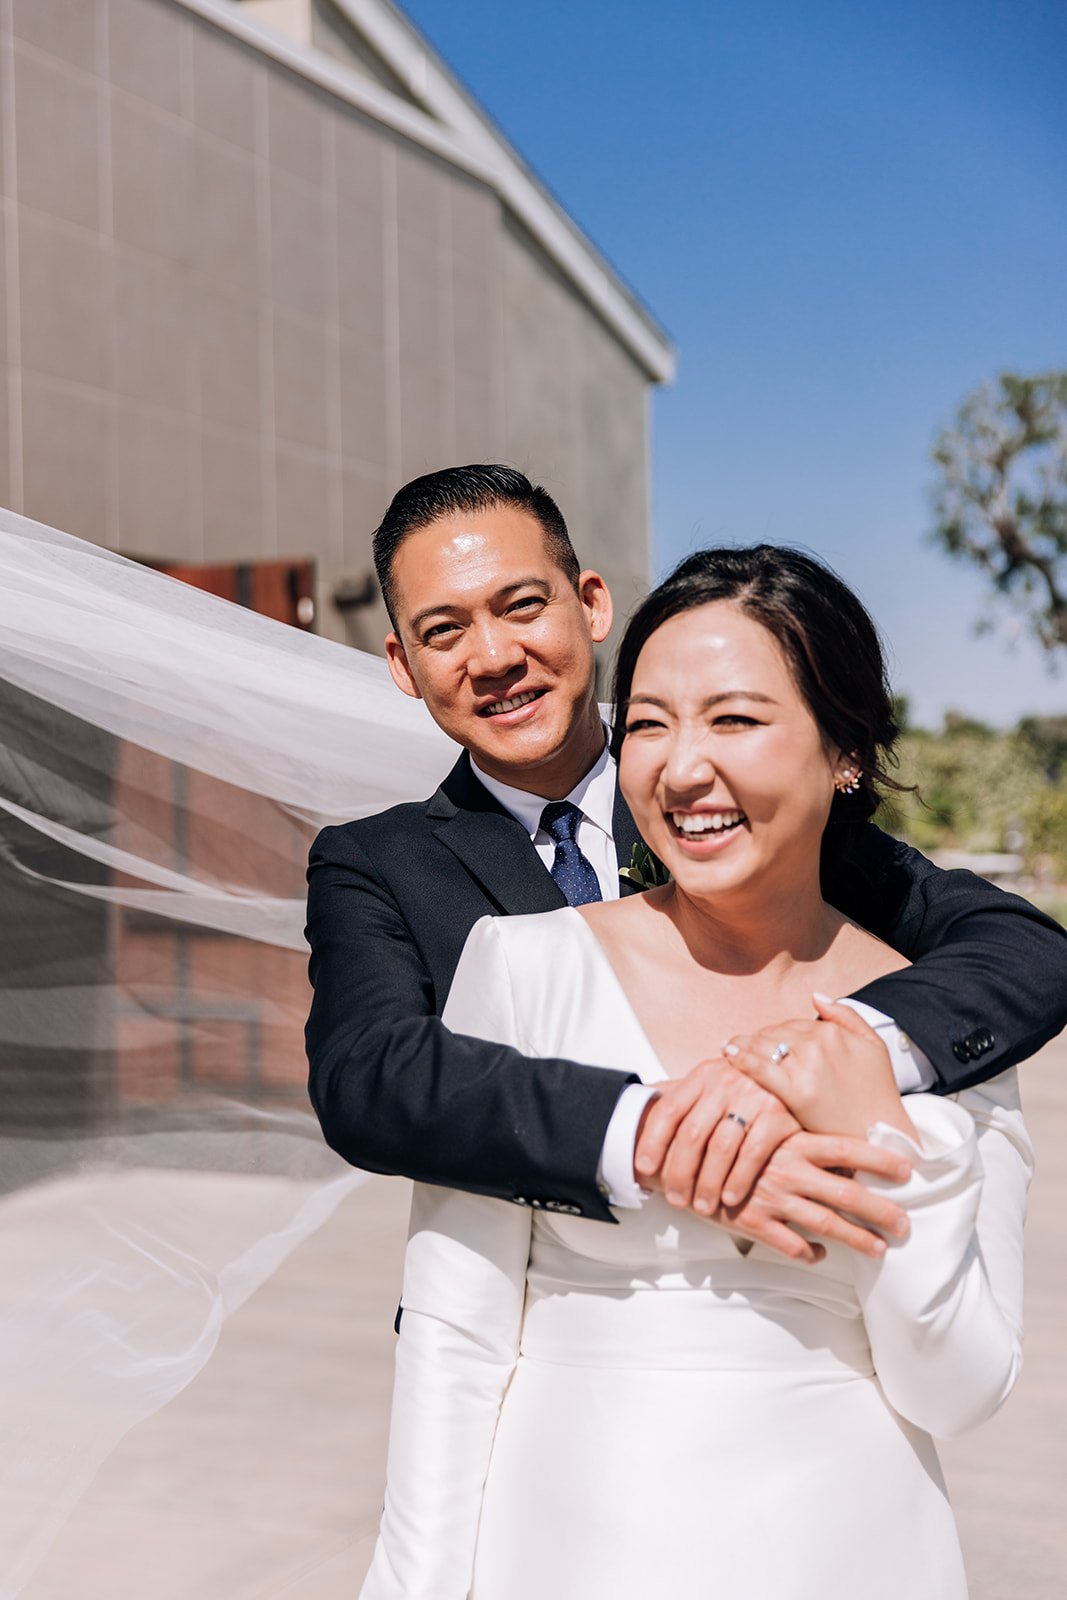 An Intimate Elopement &amp; Rehearsal Dinner In Orange County, CA